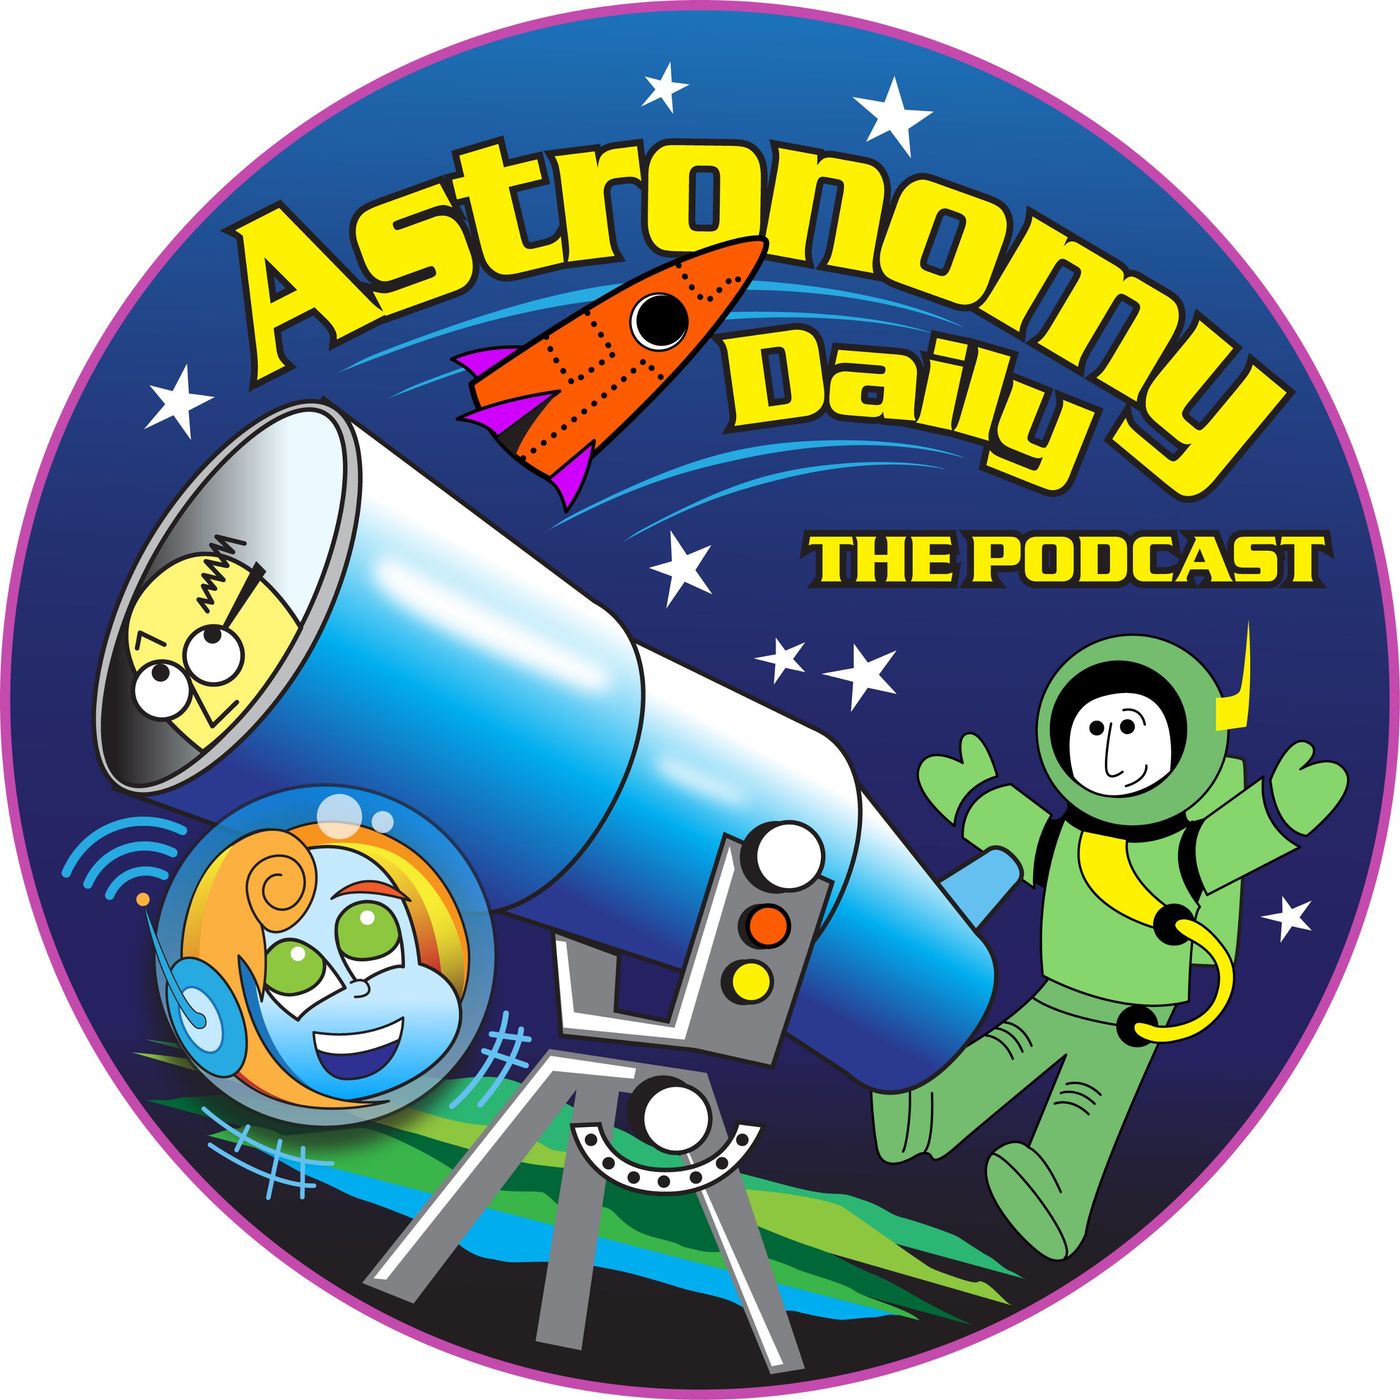 Astronomy Daily the Podcast - Sampler Edition - Working Together